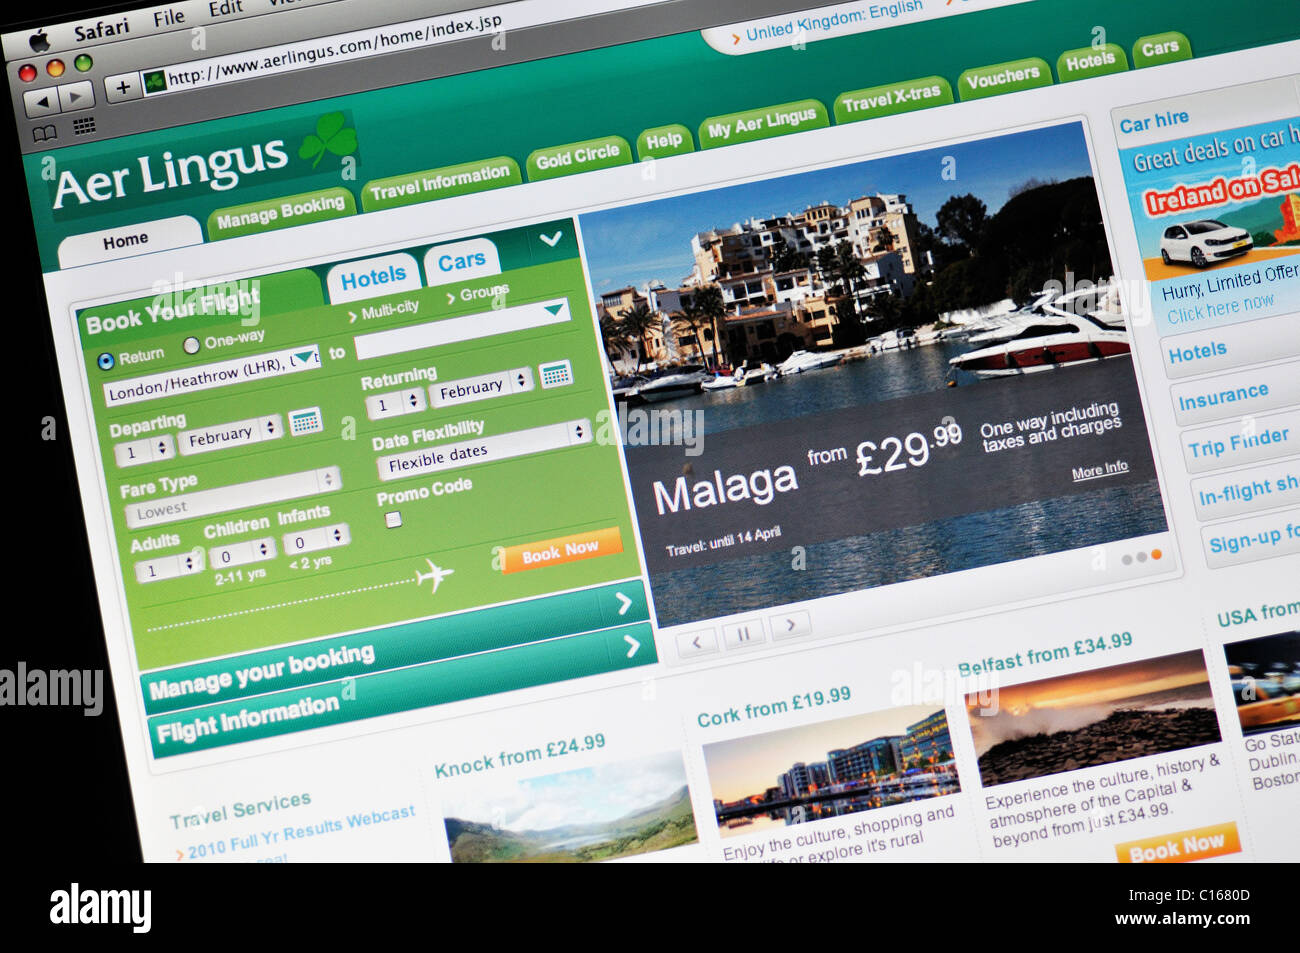 Aer Lingus Airlines website Stock Photo